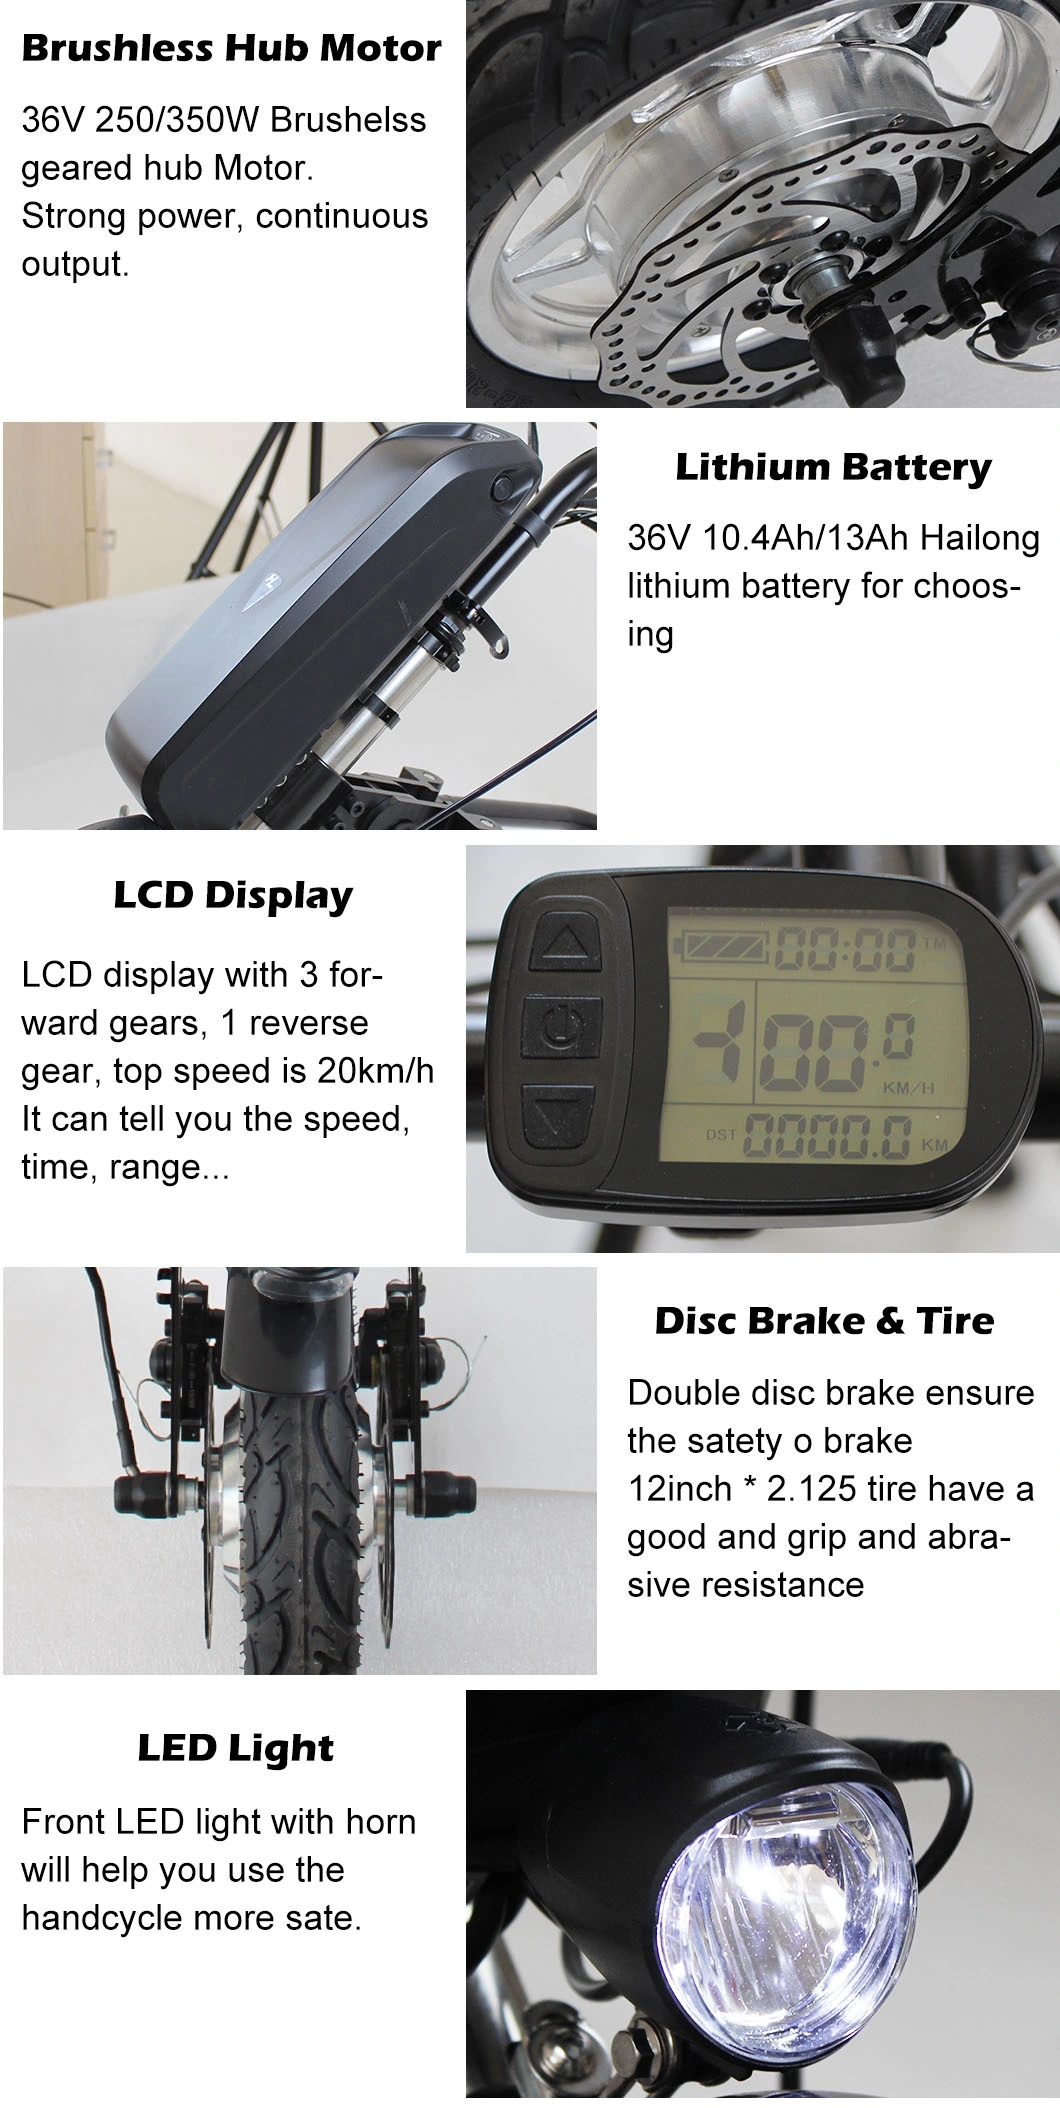 Hot Sale 250W 350W 36V 12inch Electric Handcycle Wheelchair for Older with 36V10.4A Battery